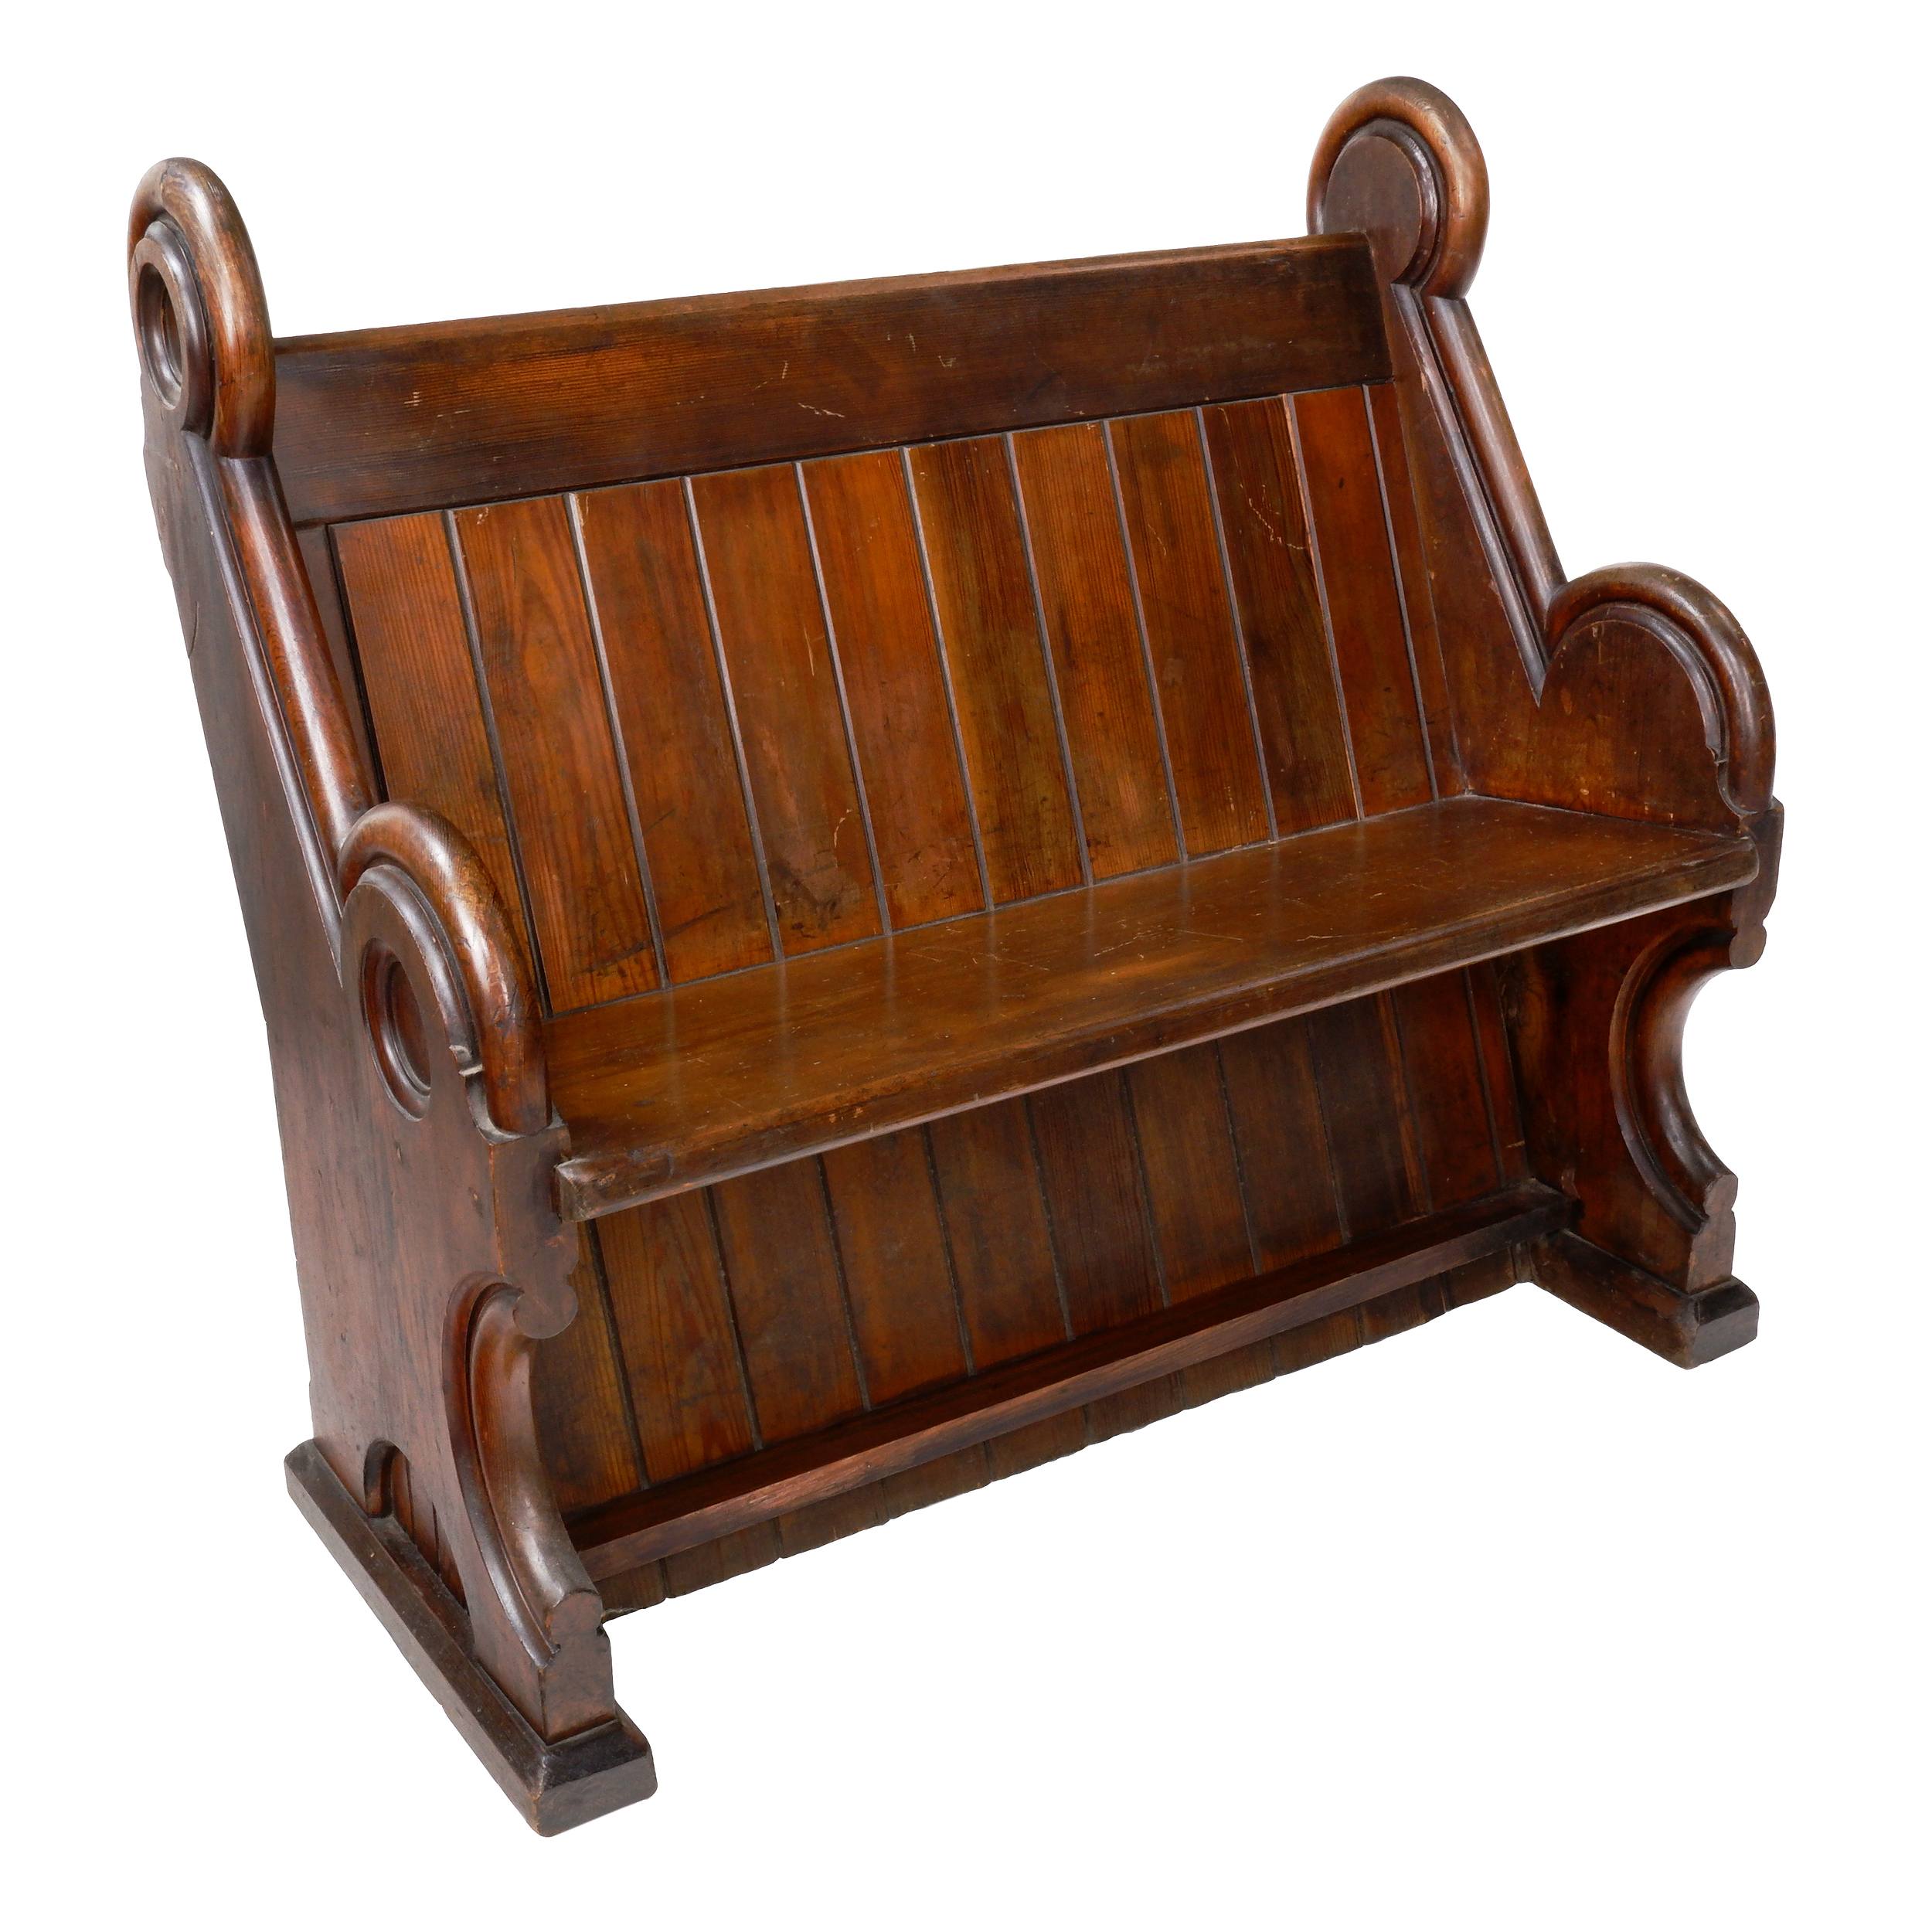 'Antique Stained Pine Church Pew'